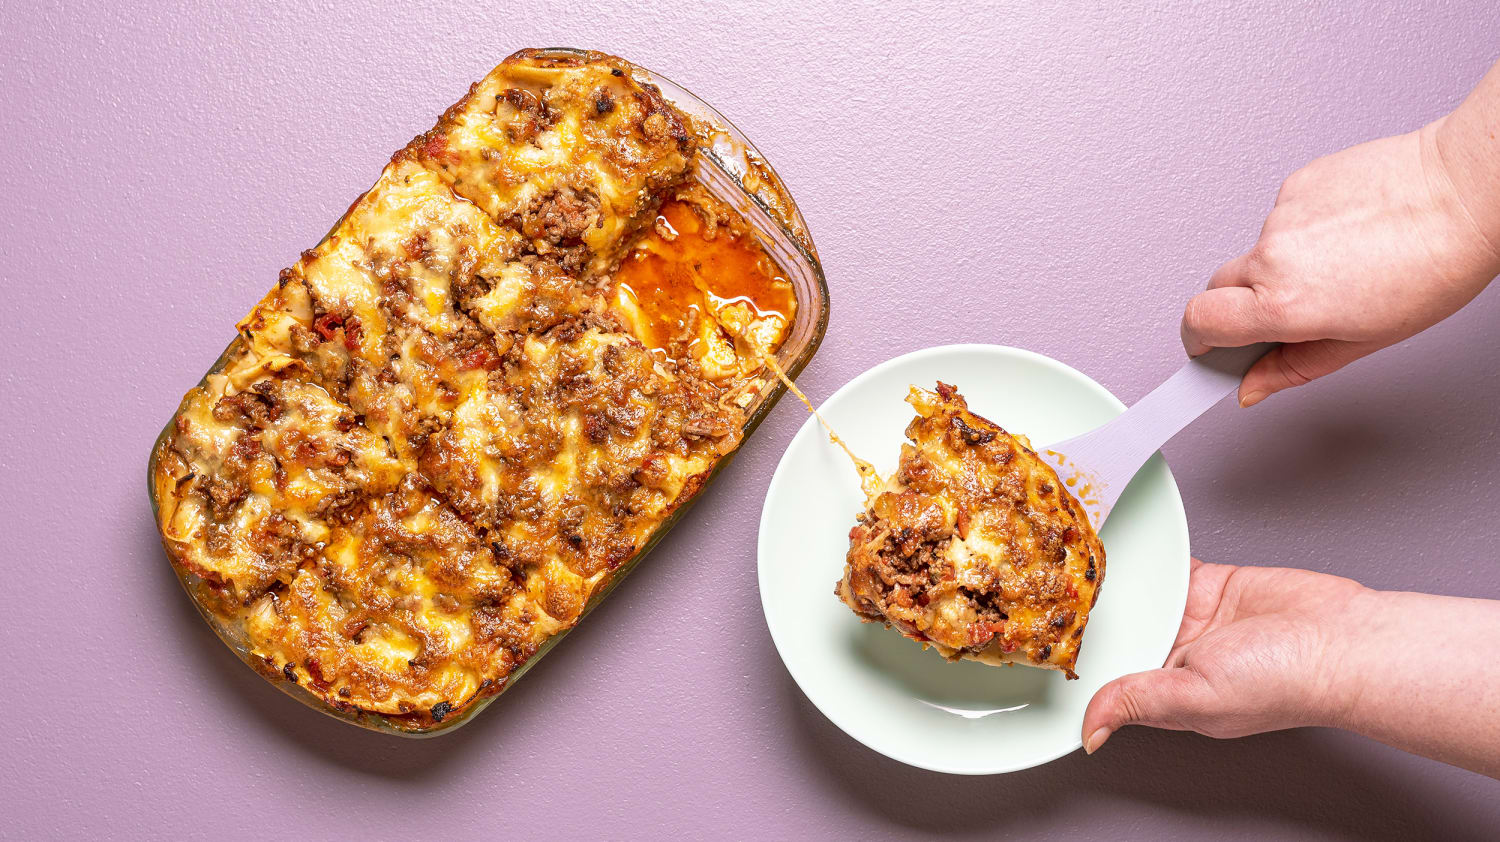 41 lasagna recipes from classic bolognese to spring vegetable